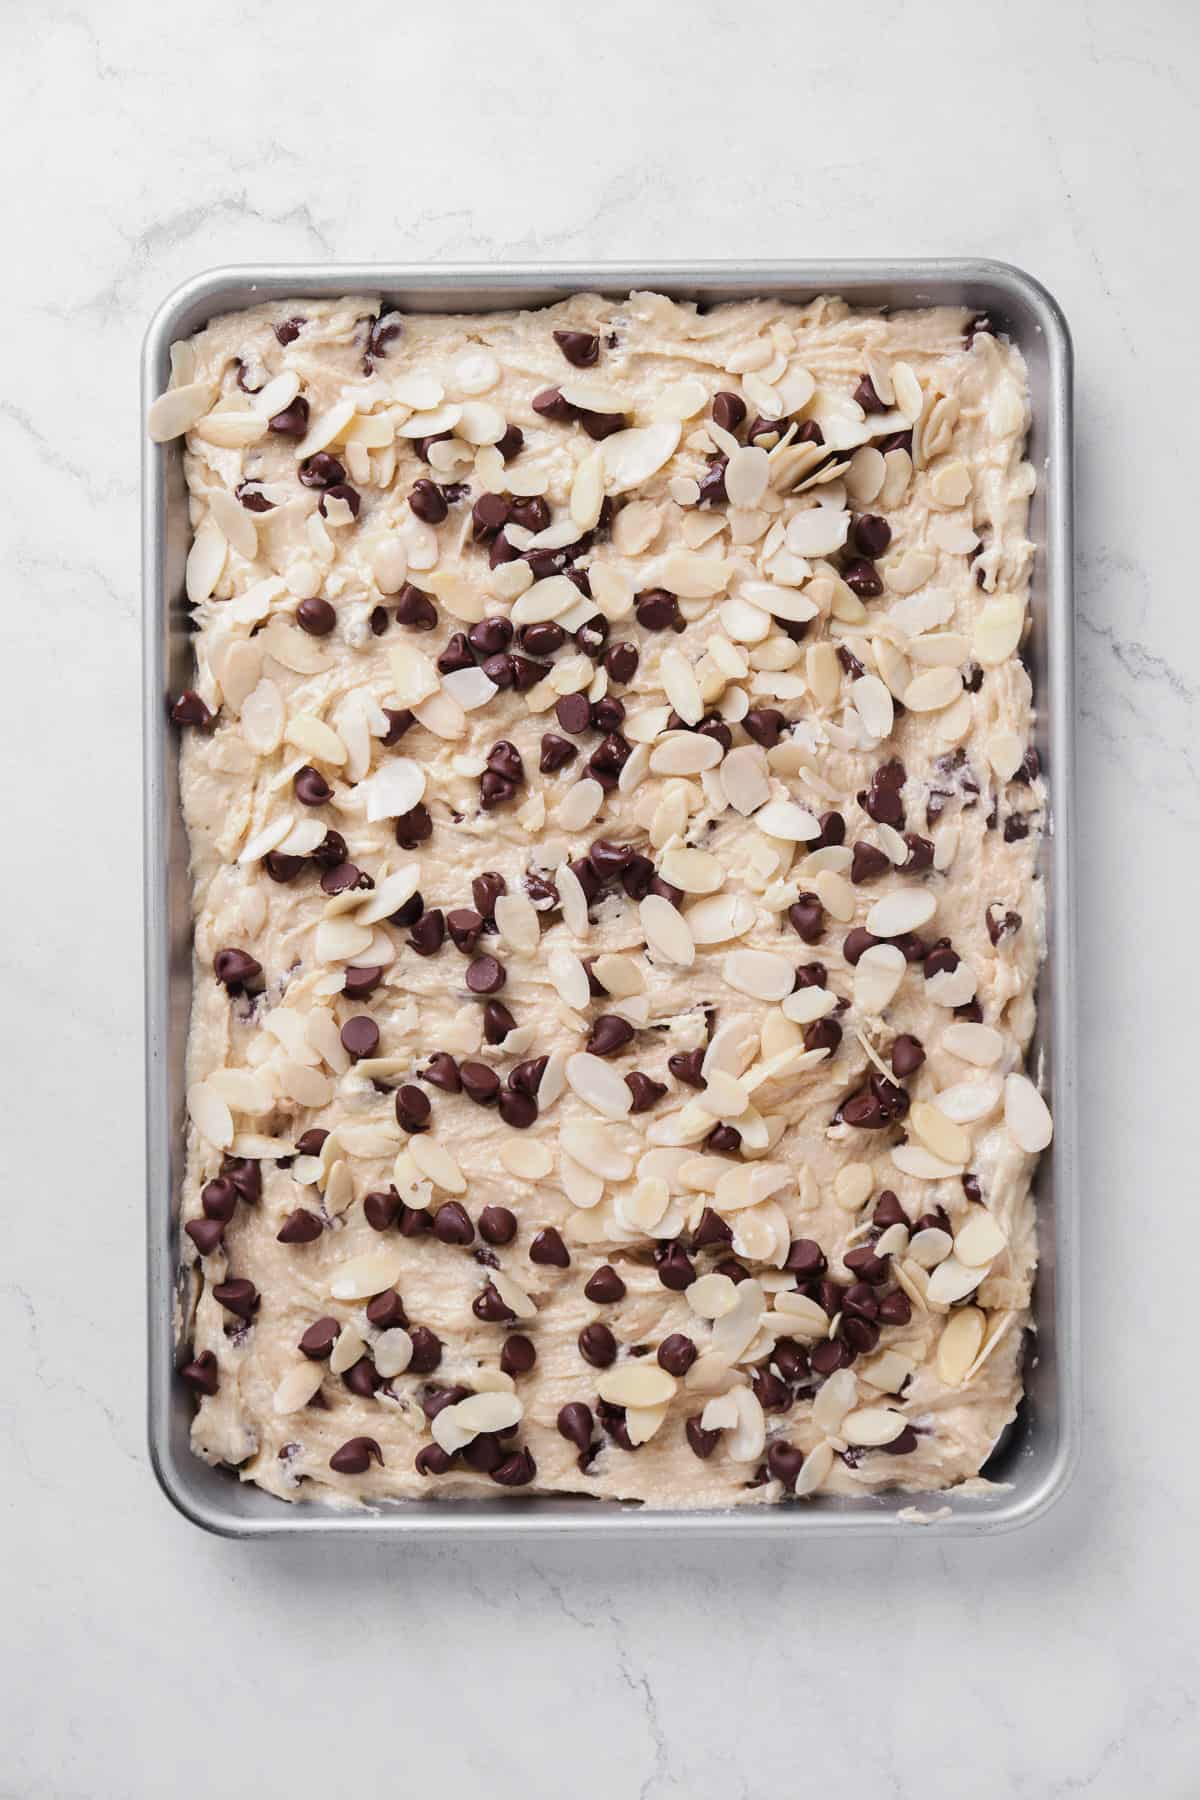 spread dough into prepared sheet pan and top with additional chocolate chips and sliced almonds.